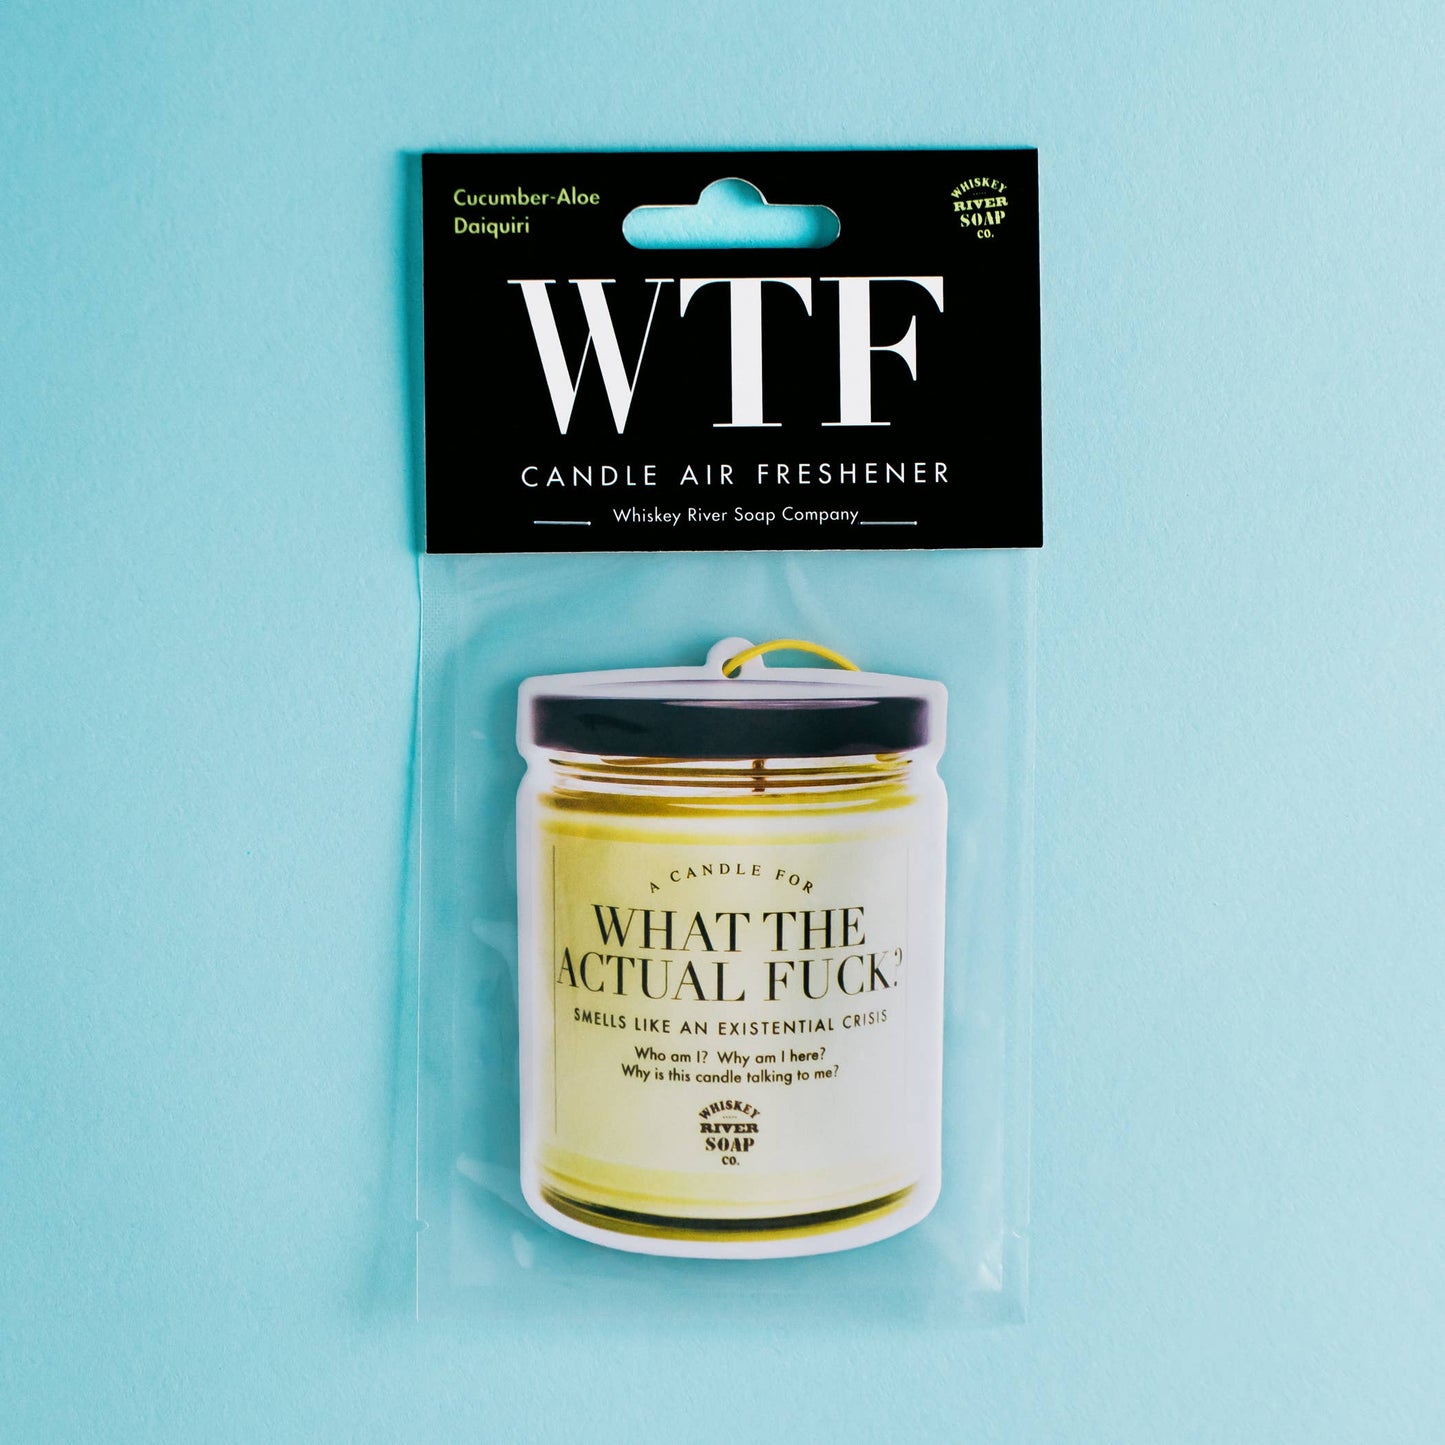 Whiskey River Soap Company What the Actual Fuck WTF Air Freshener